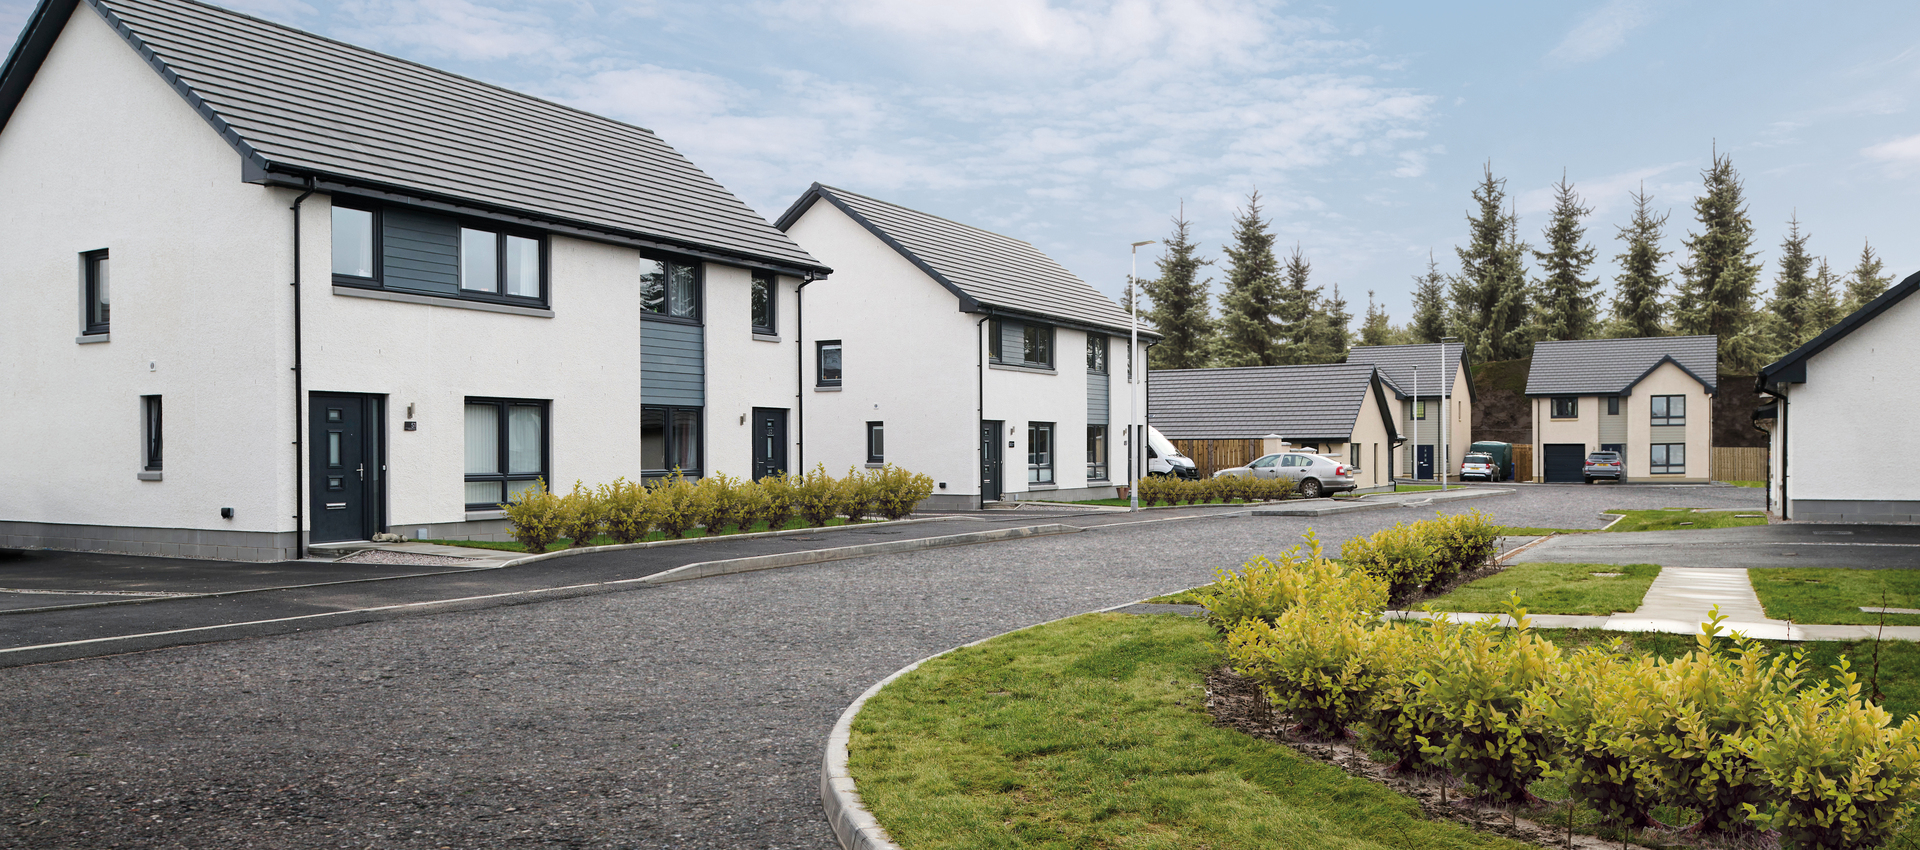 Tulloch Homes Forres